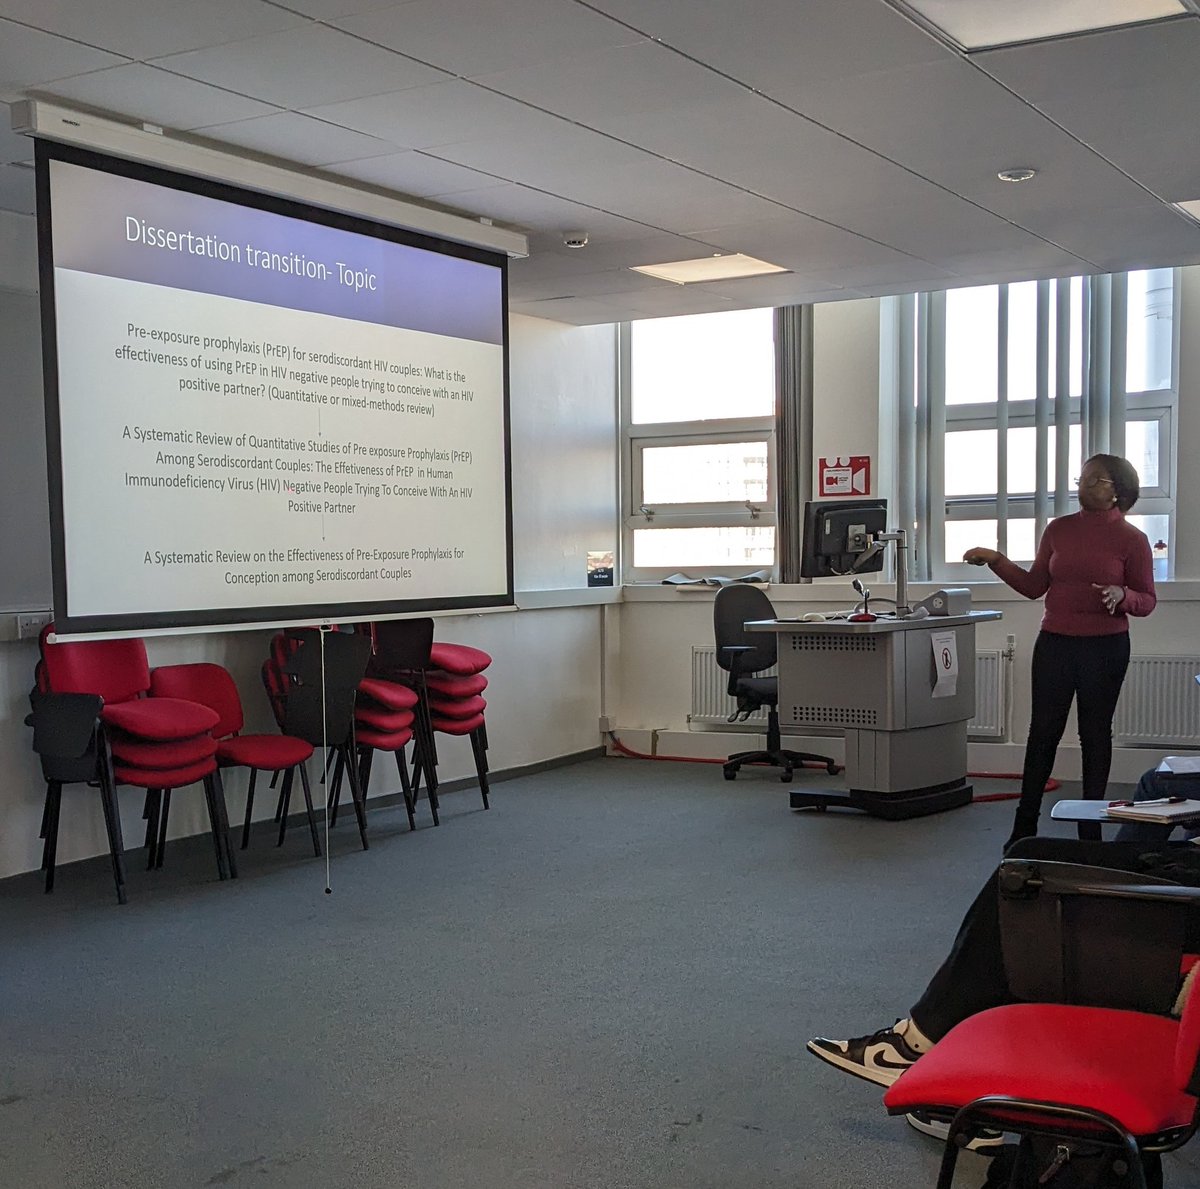 Today we heard from Lydia Kofoworola sharing her success story about her brilliant systematic review on the Effectiveness of Pre-P for conception among HIV serodiscordant couples #PublicHealth #MakeADifference @dralexcc @AMC_83 @ProfPennyCook @mccarthyjets